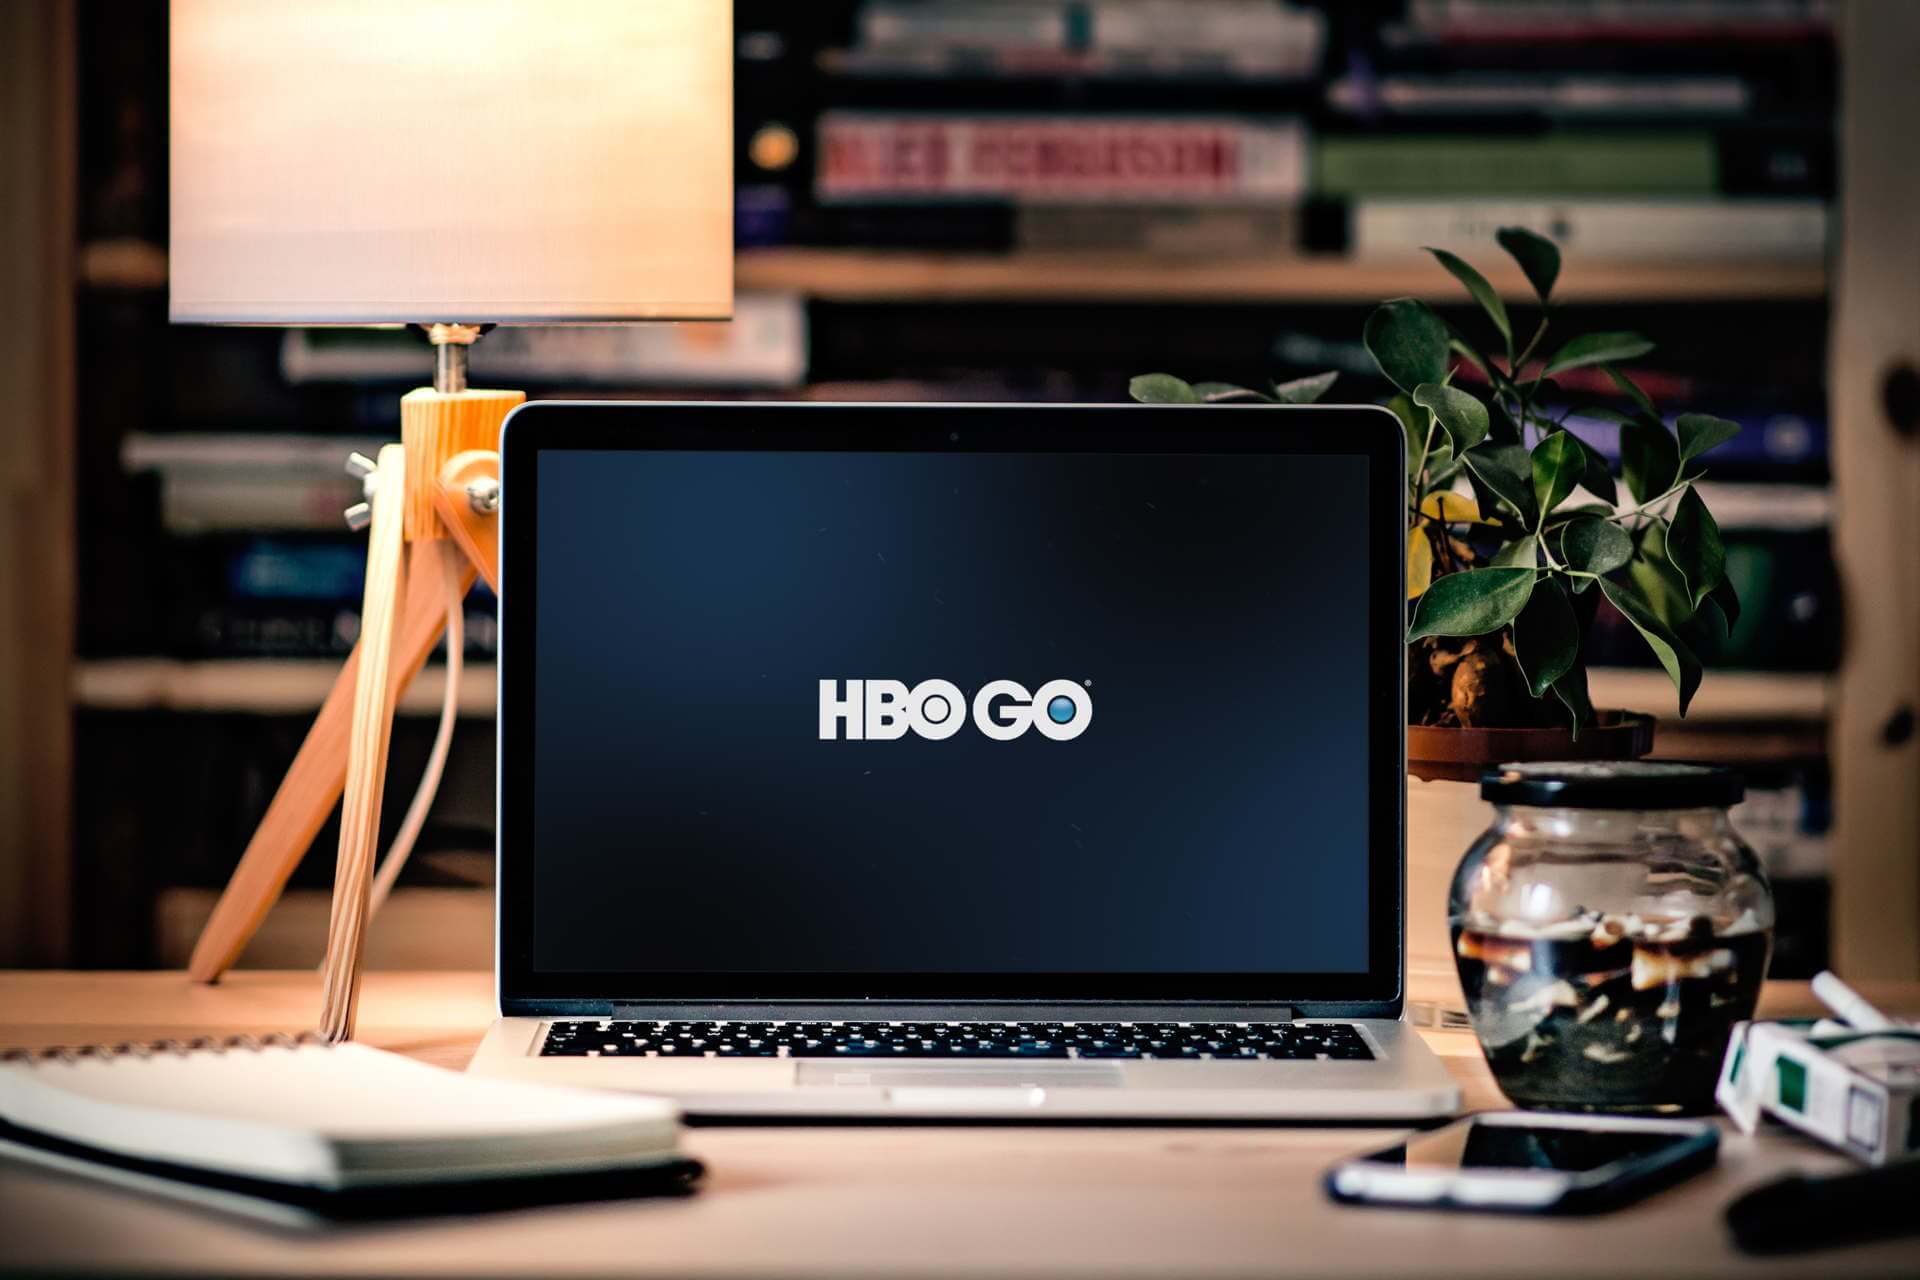 HBO GO activate isn't working